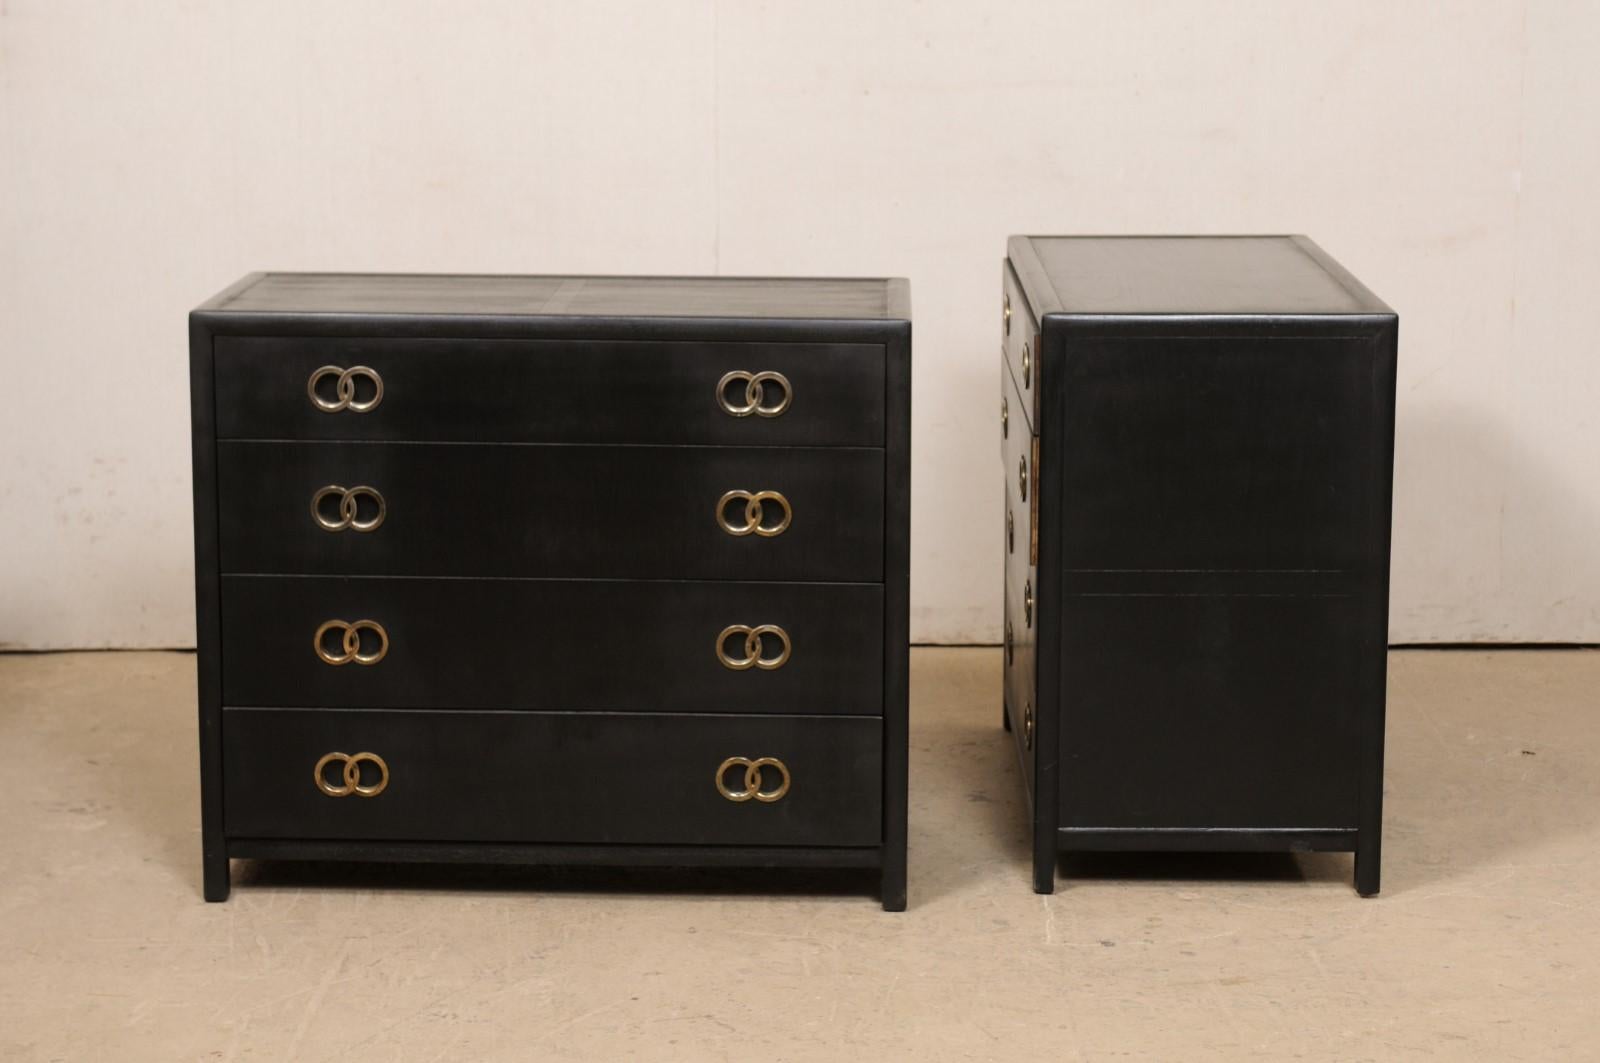 Pair Vintage Chest of Drawers in Black with Silver Hardware, Clean Modern Design For Sale 4